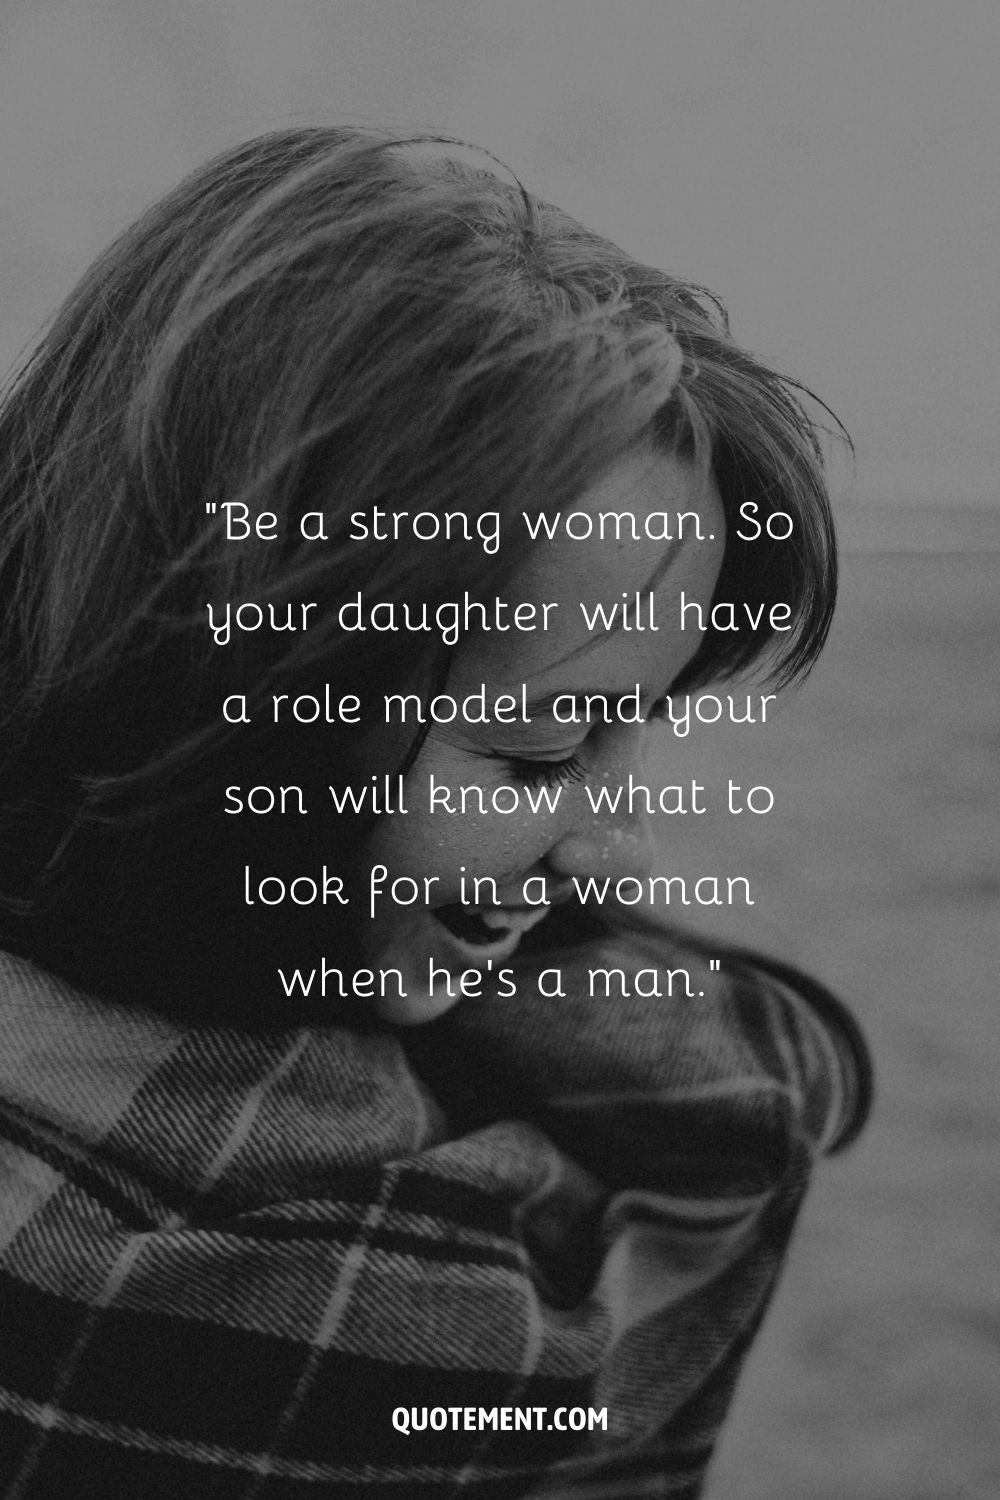 Figure looking ahead, hair tousled representing quote about being a strong woman and moving on